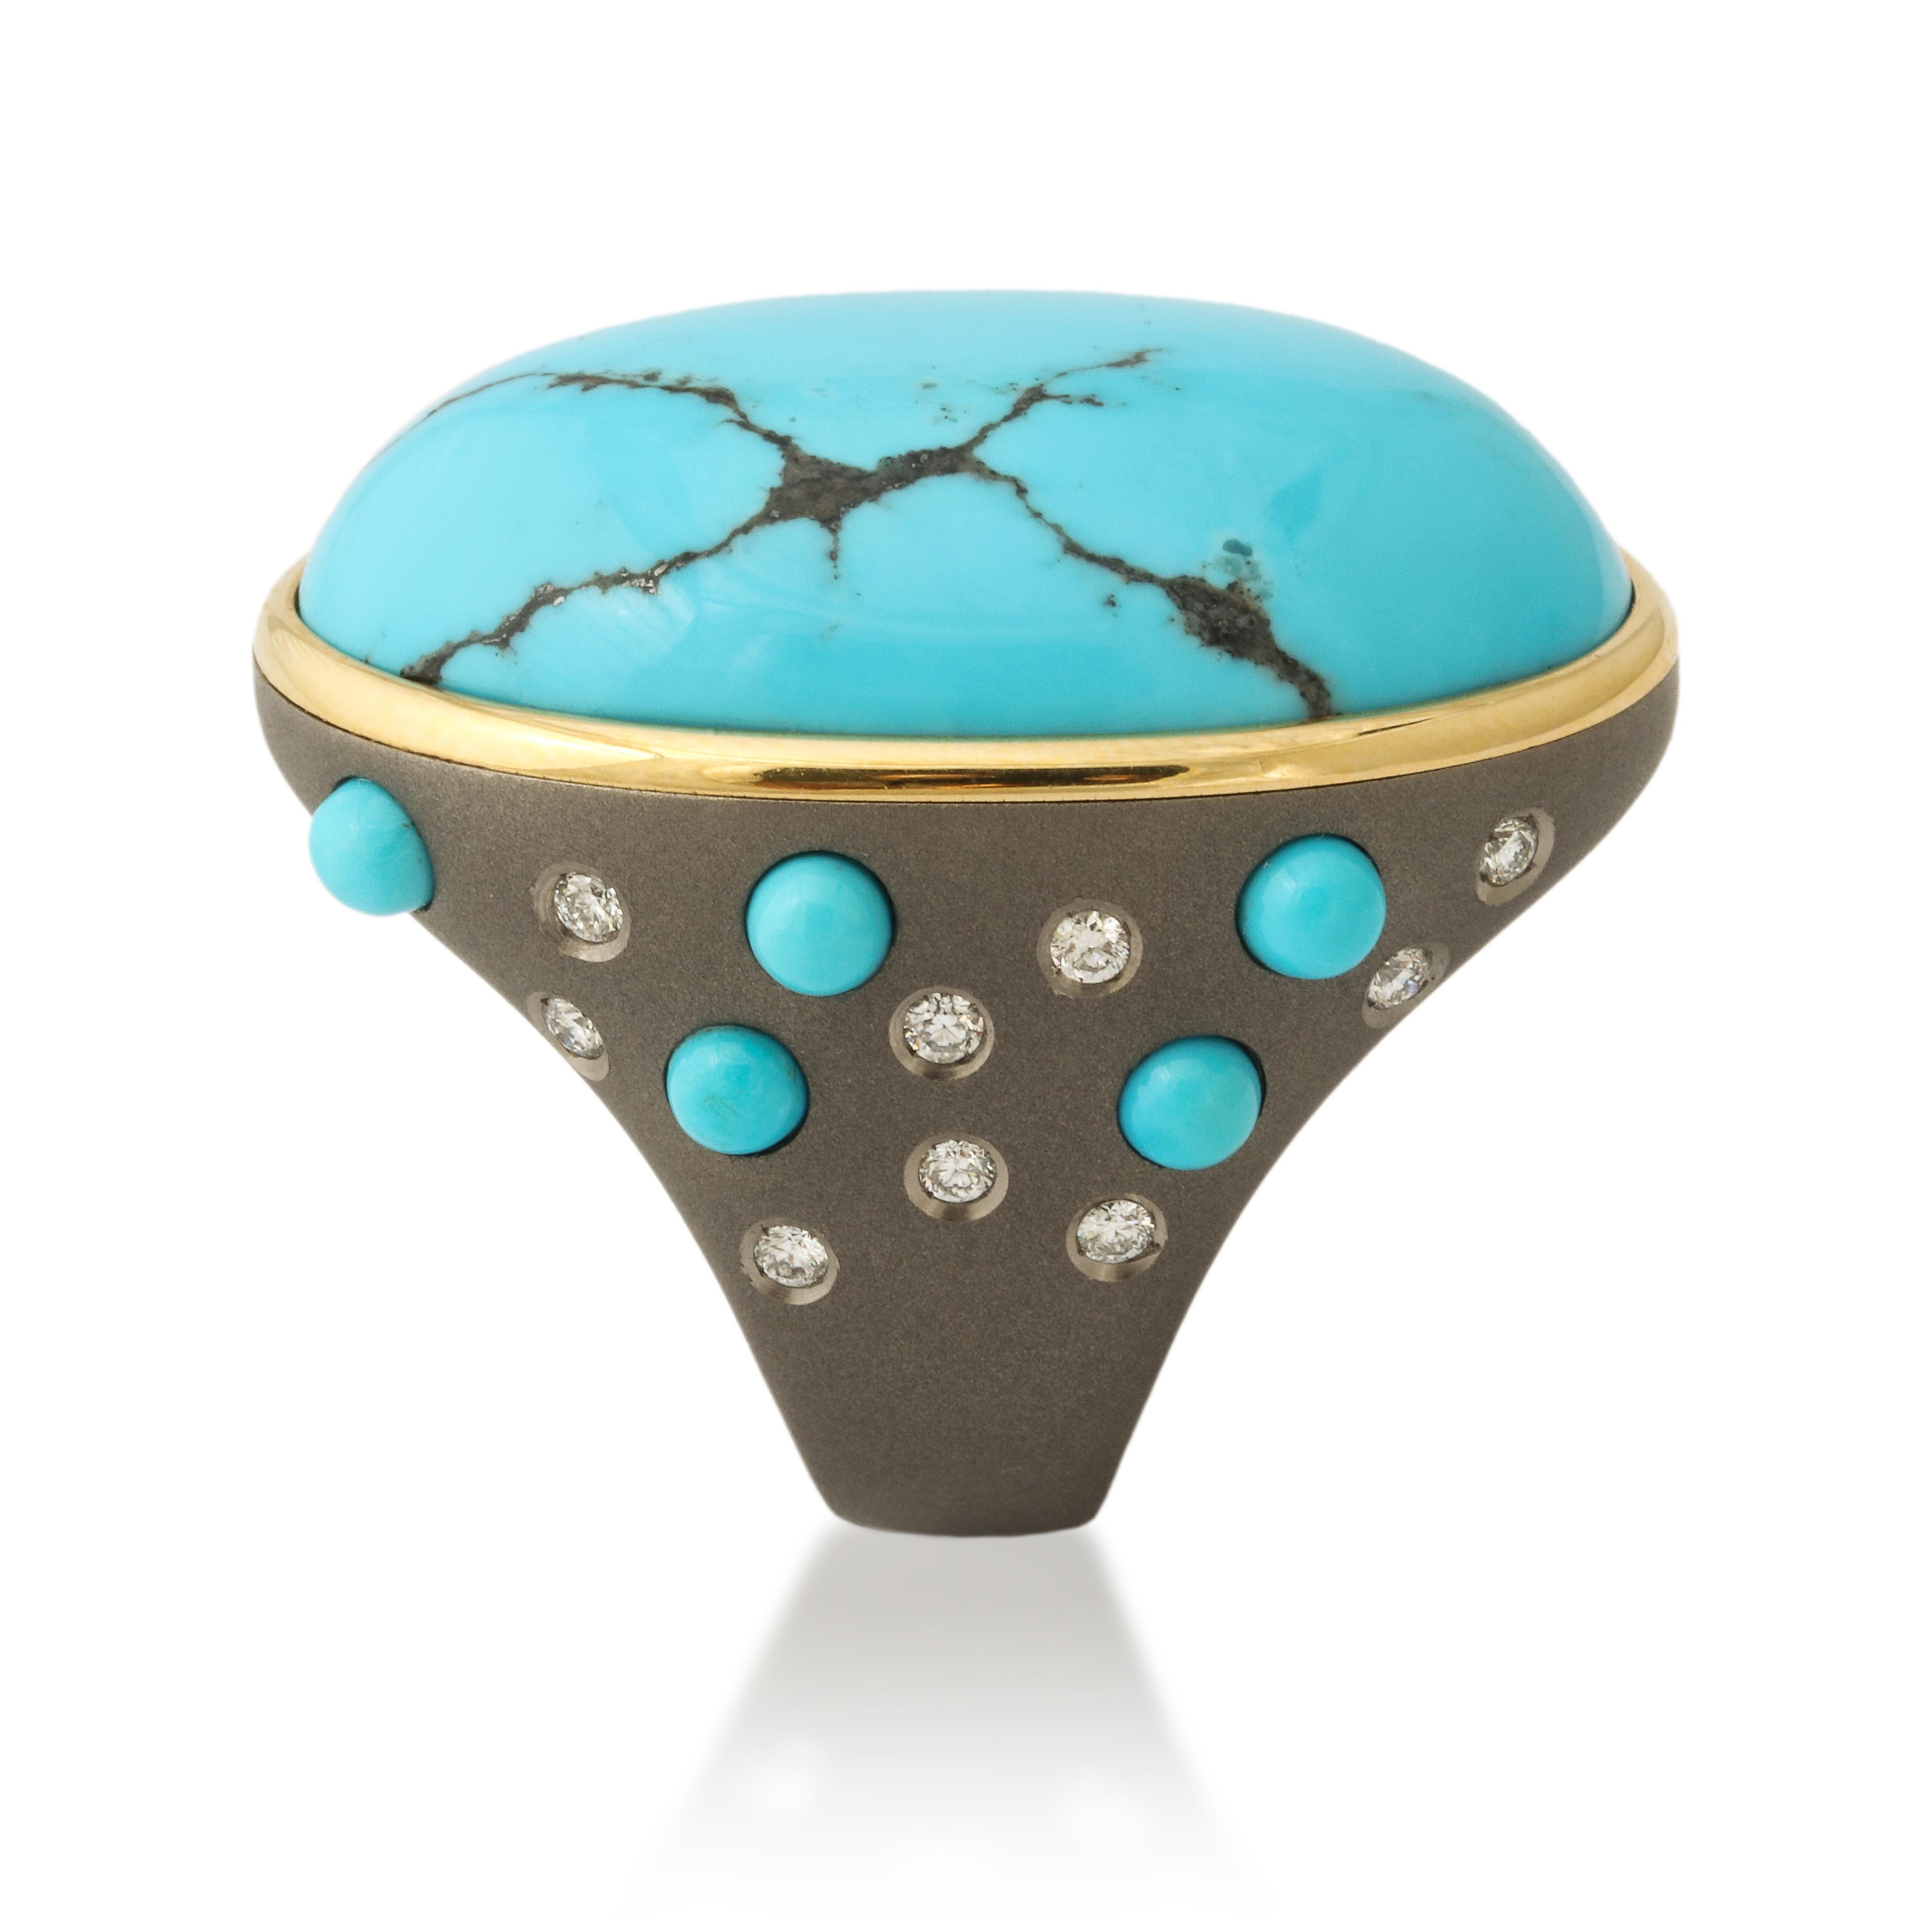 This ring embodies the perfect combination of nature and contemporary design with the impressive 44 carat turquoise, revealing a trace of it's original black matrix, mounted in titanium.  For extra flair the mounting is set with smaller turquoise